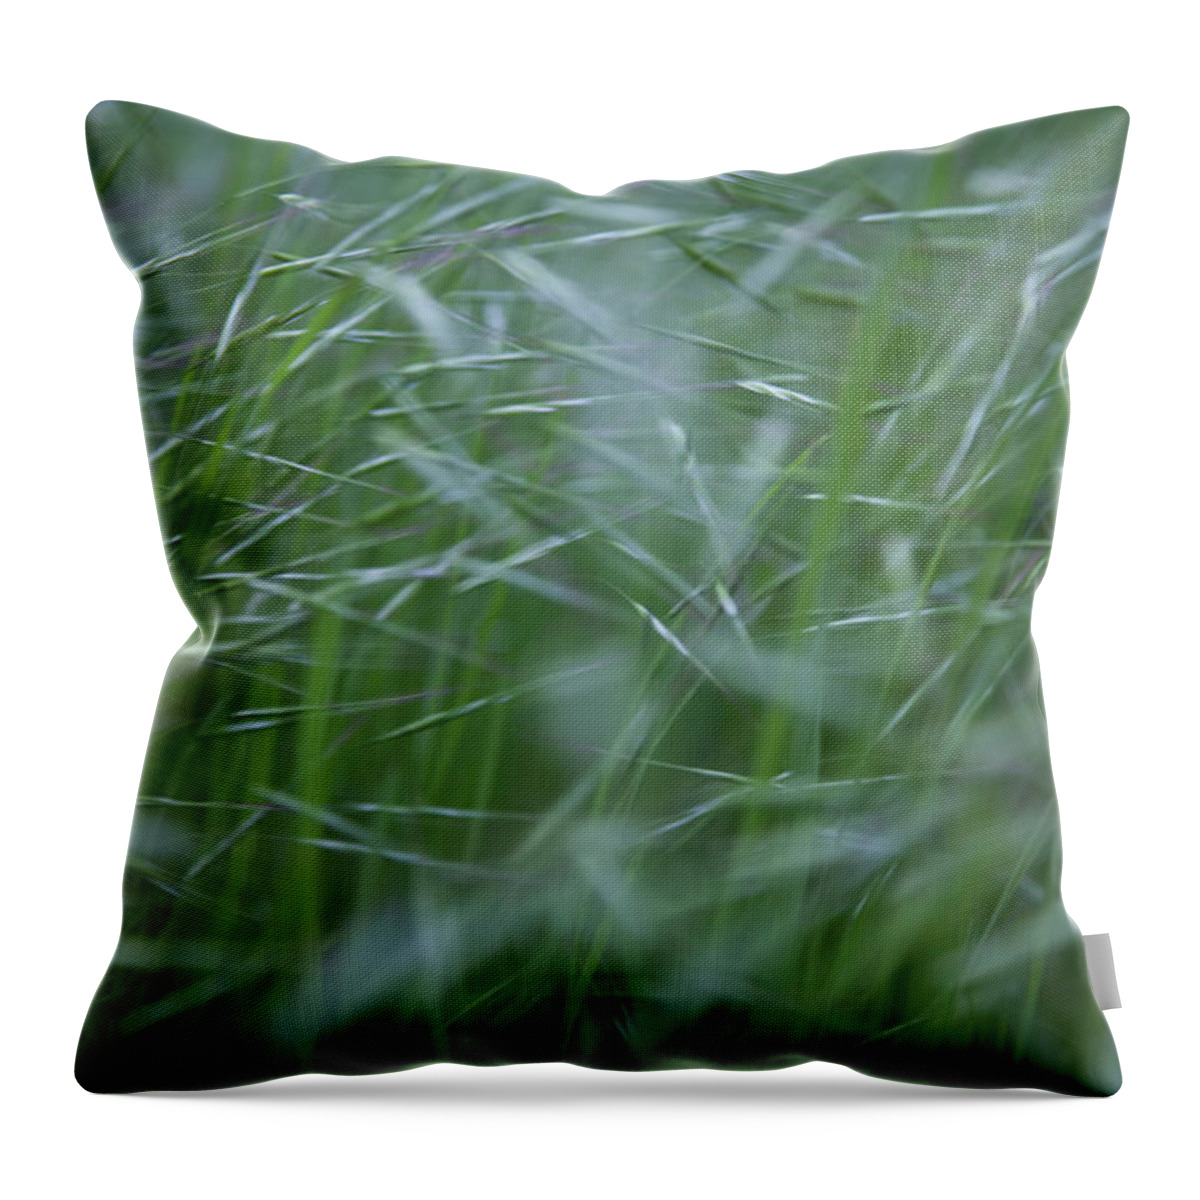 Abstract Throw Pillow featuring the photograph Blurry Wheat by Maria Heyens